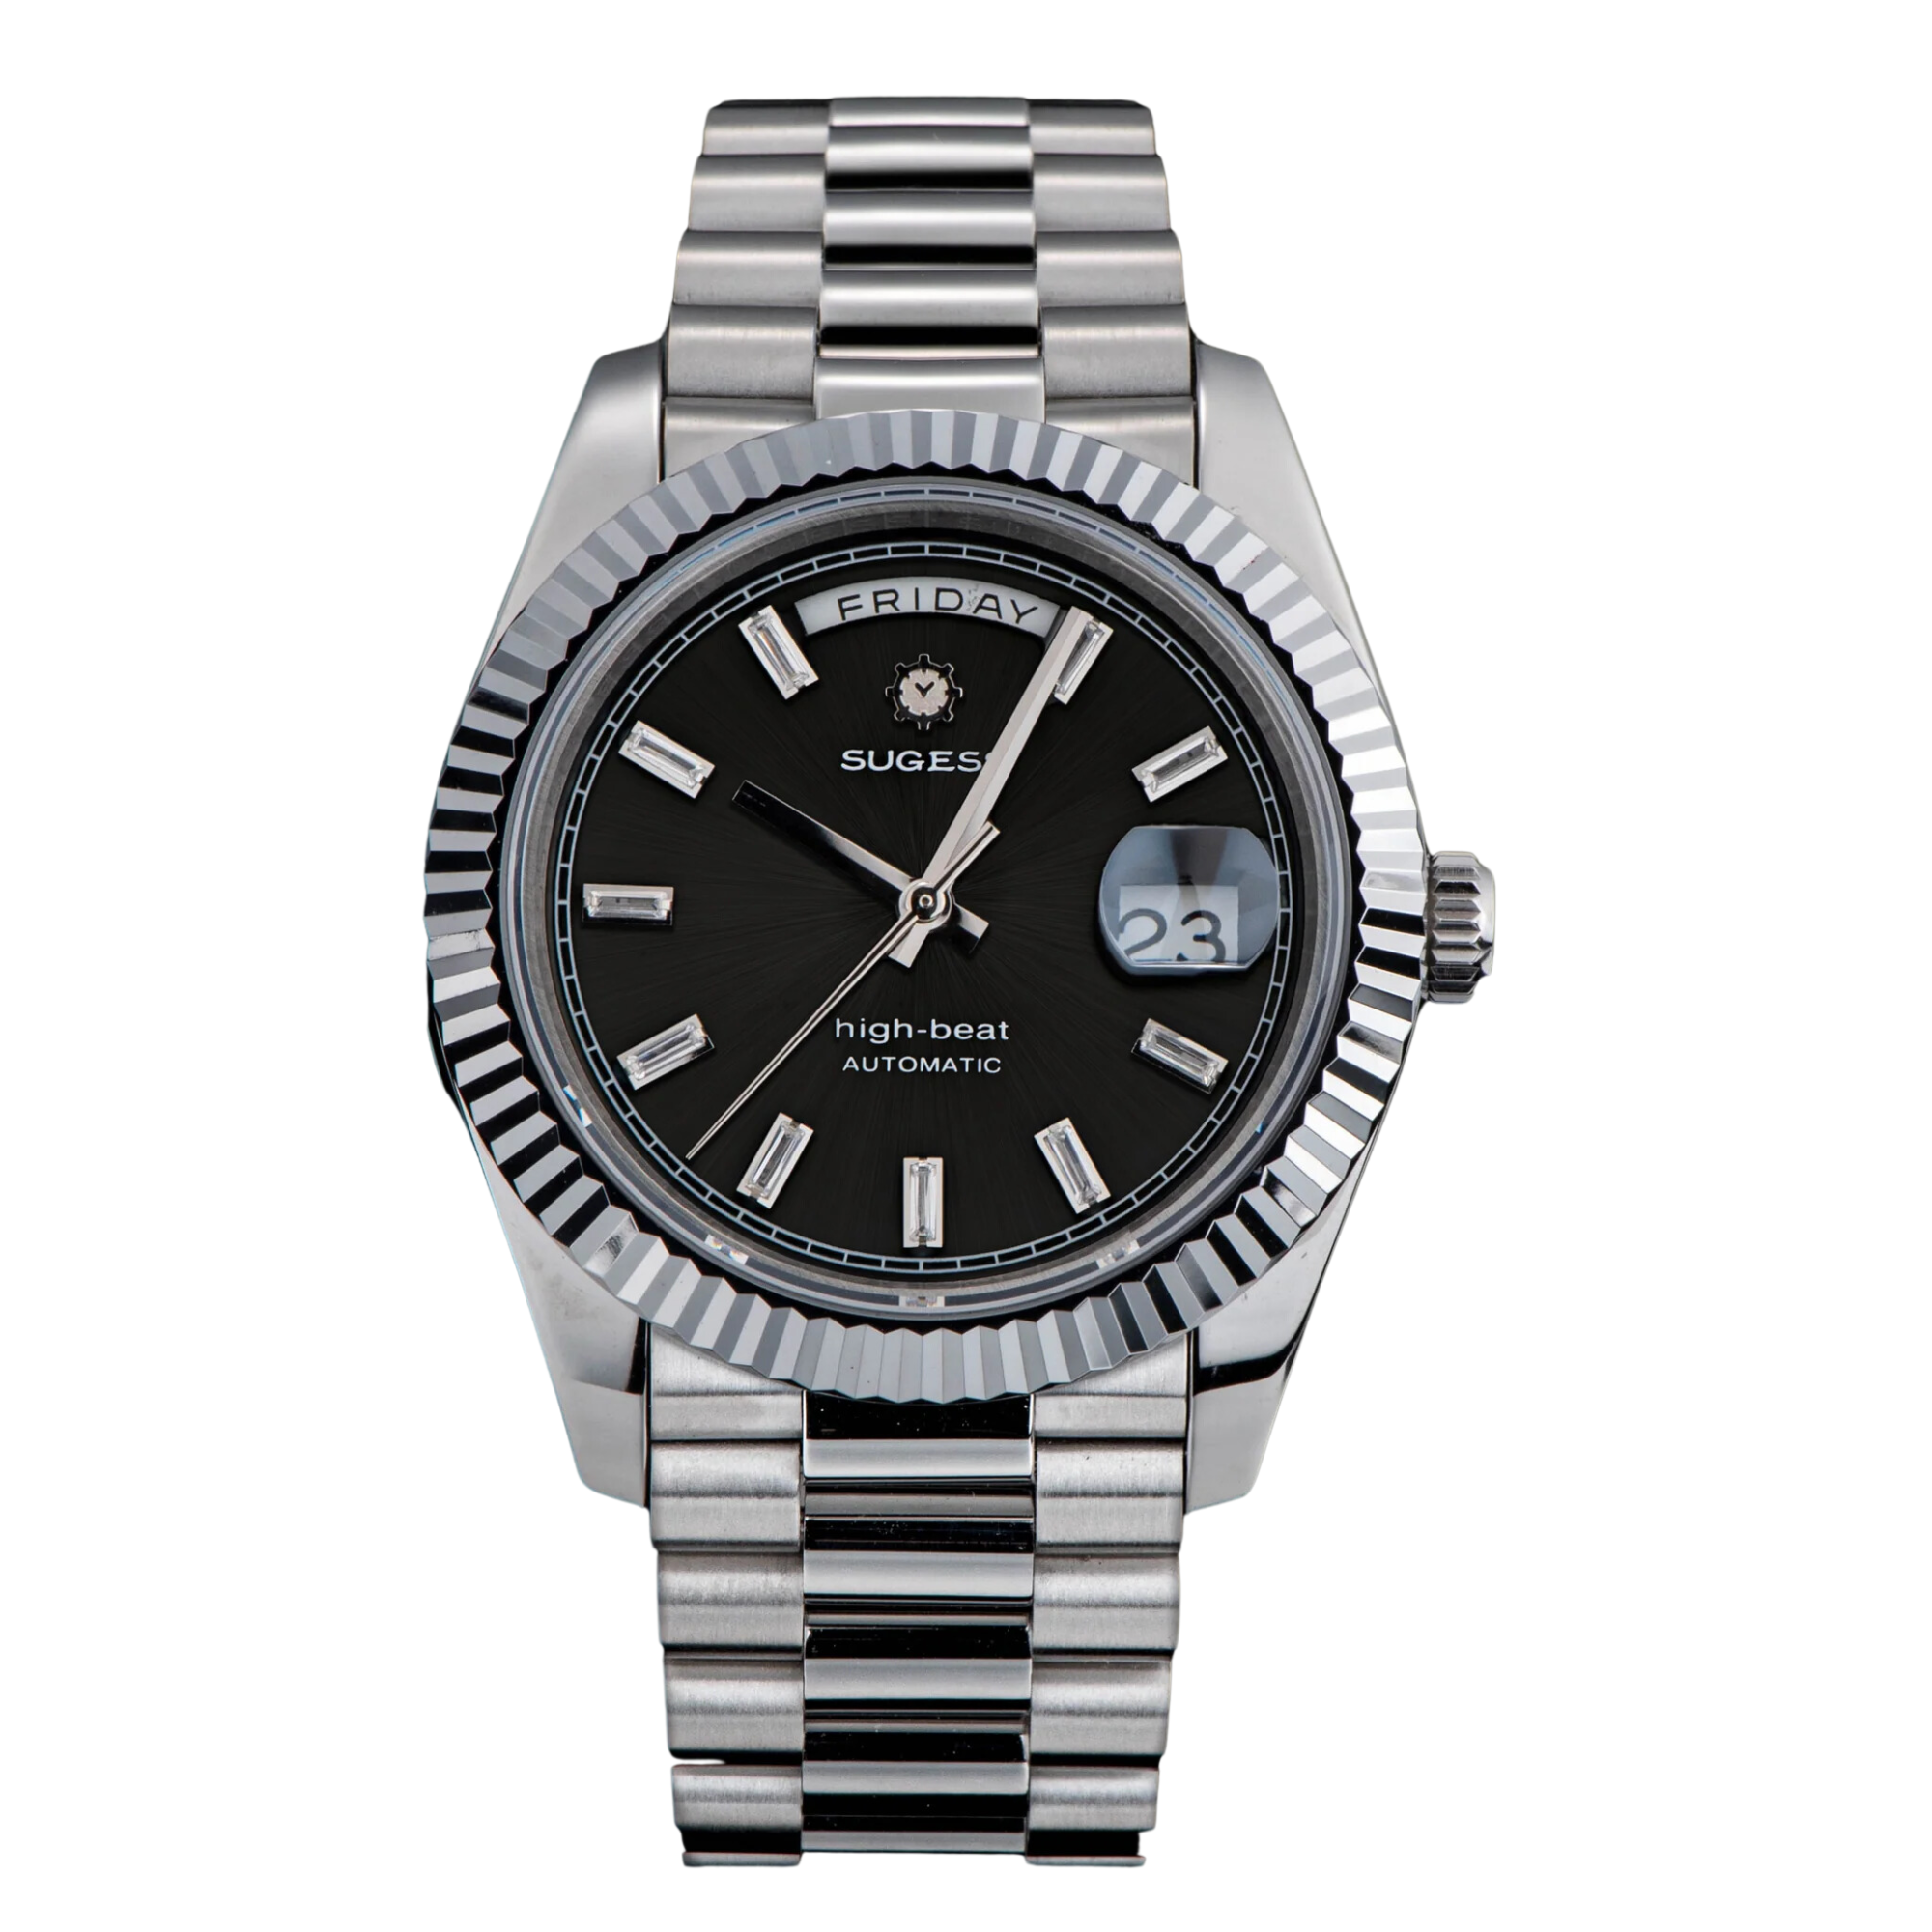 Sugess Heritage 433 DD Date and Day Display Stainless-Steel - Black Dial